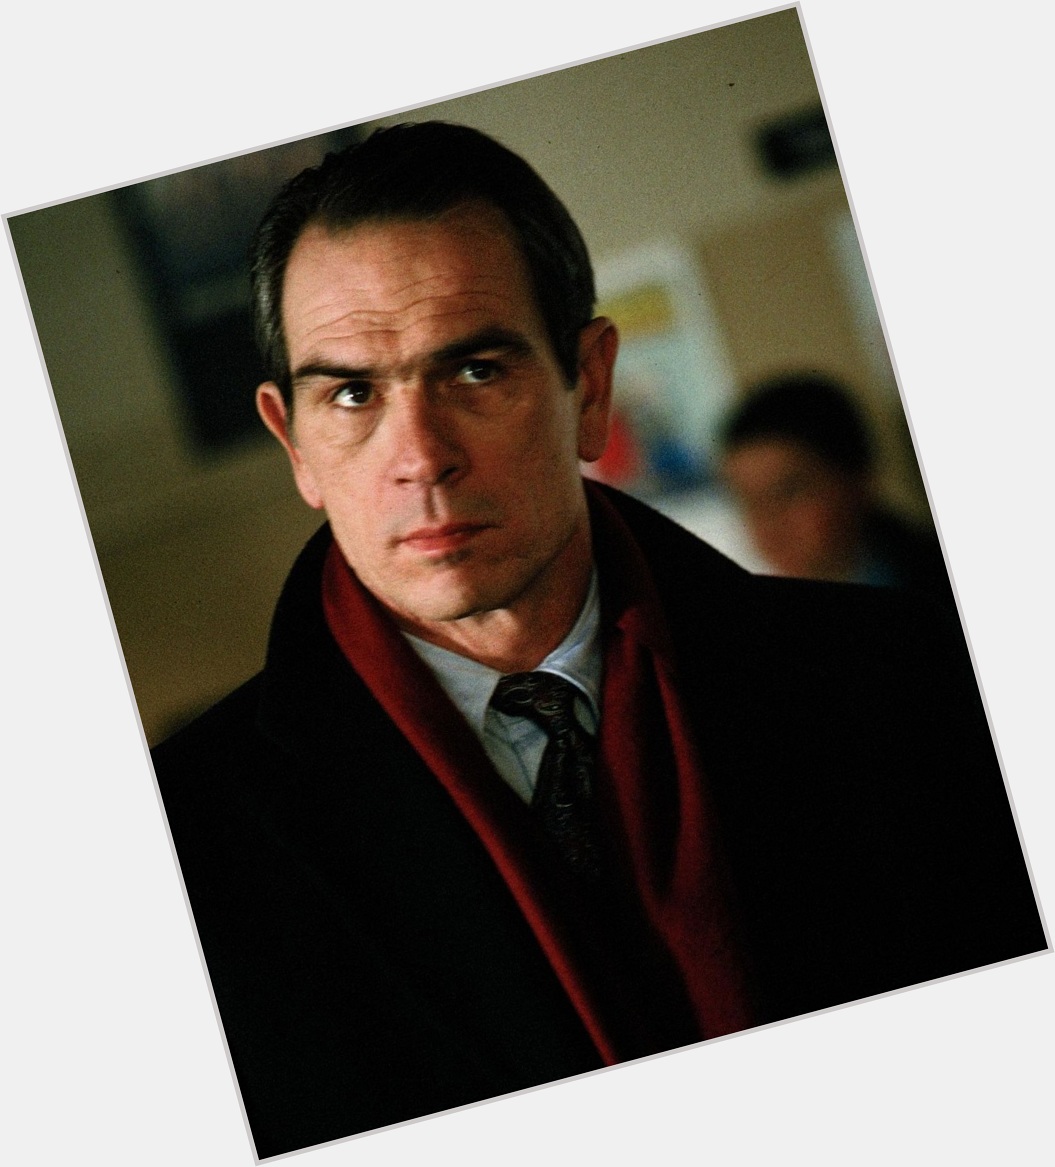 Happy 75th birthday to Tommy Lee Jones today! 